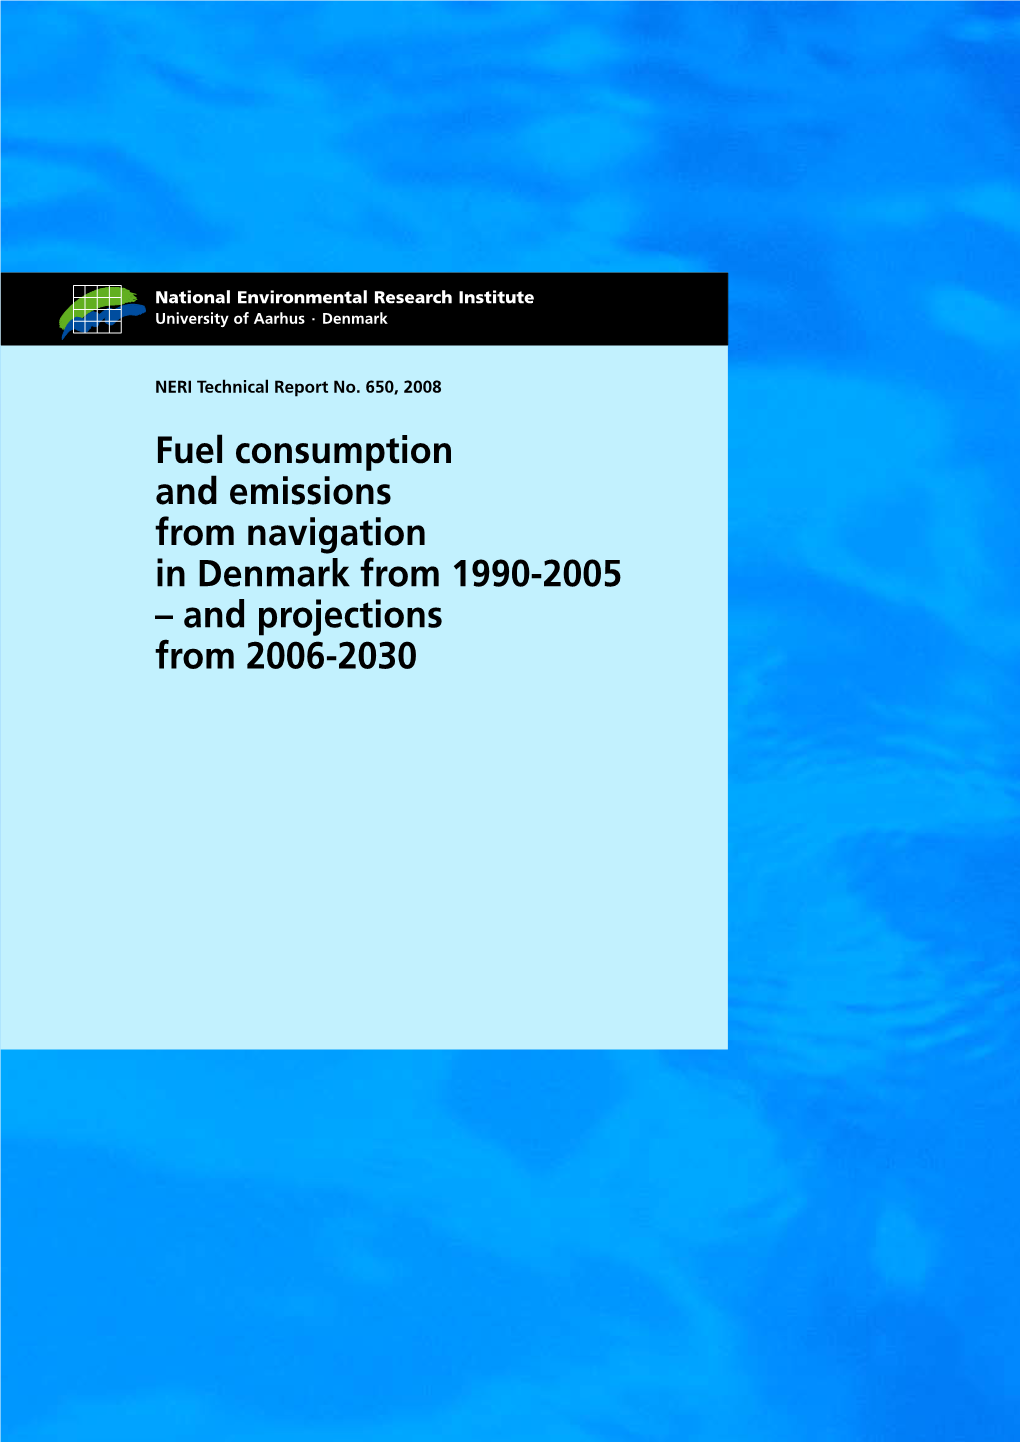 Fuel Consumption and Emissions from Navigation in Denmark from 1990-2005